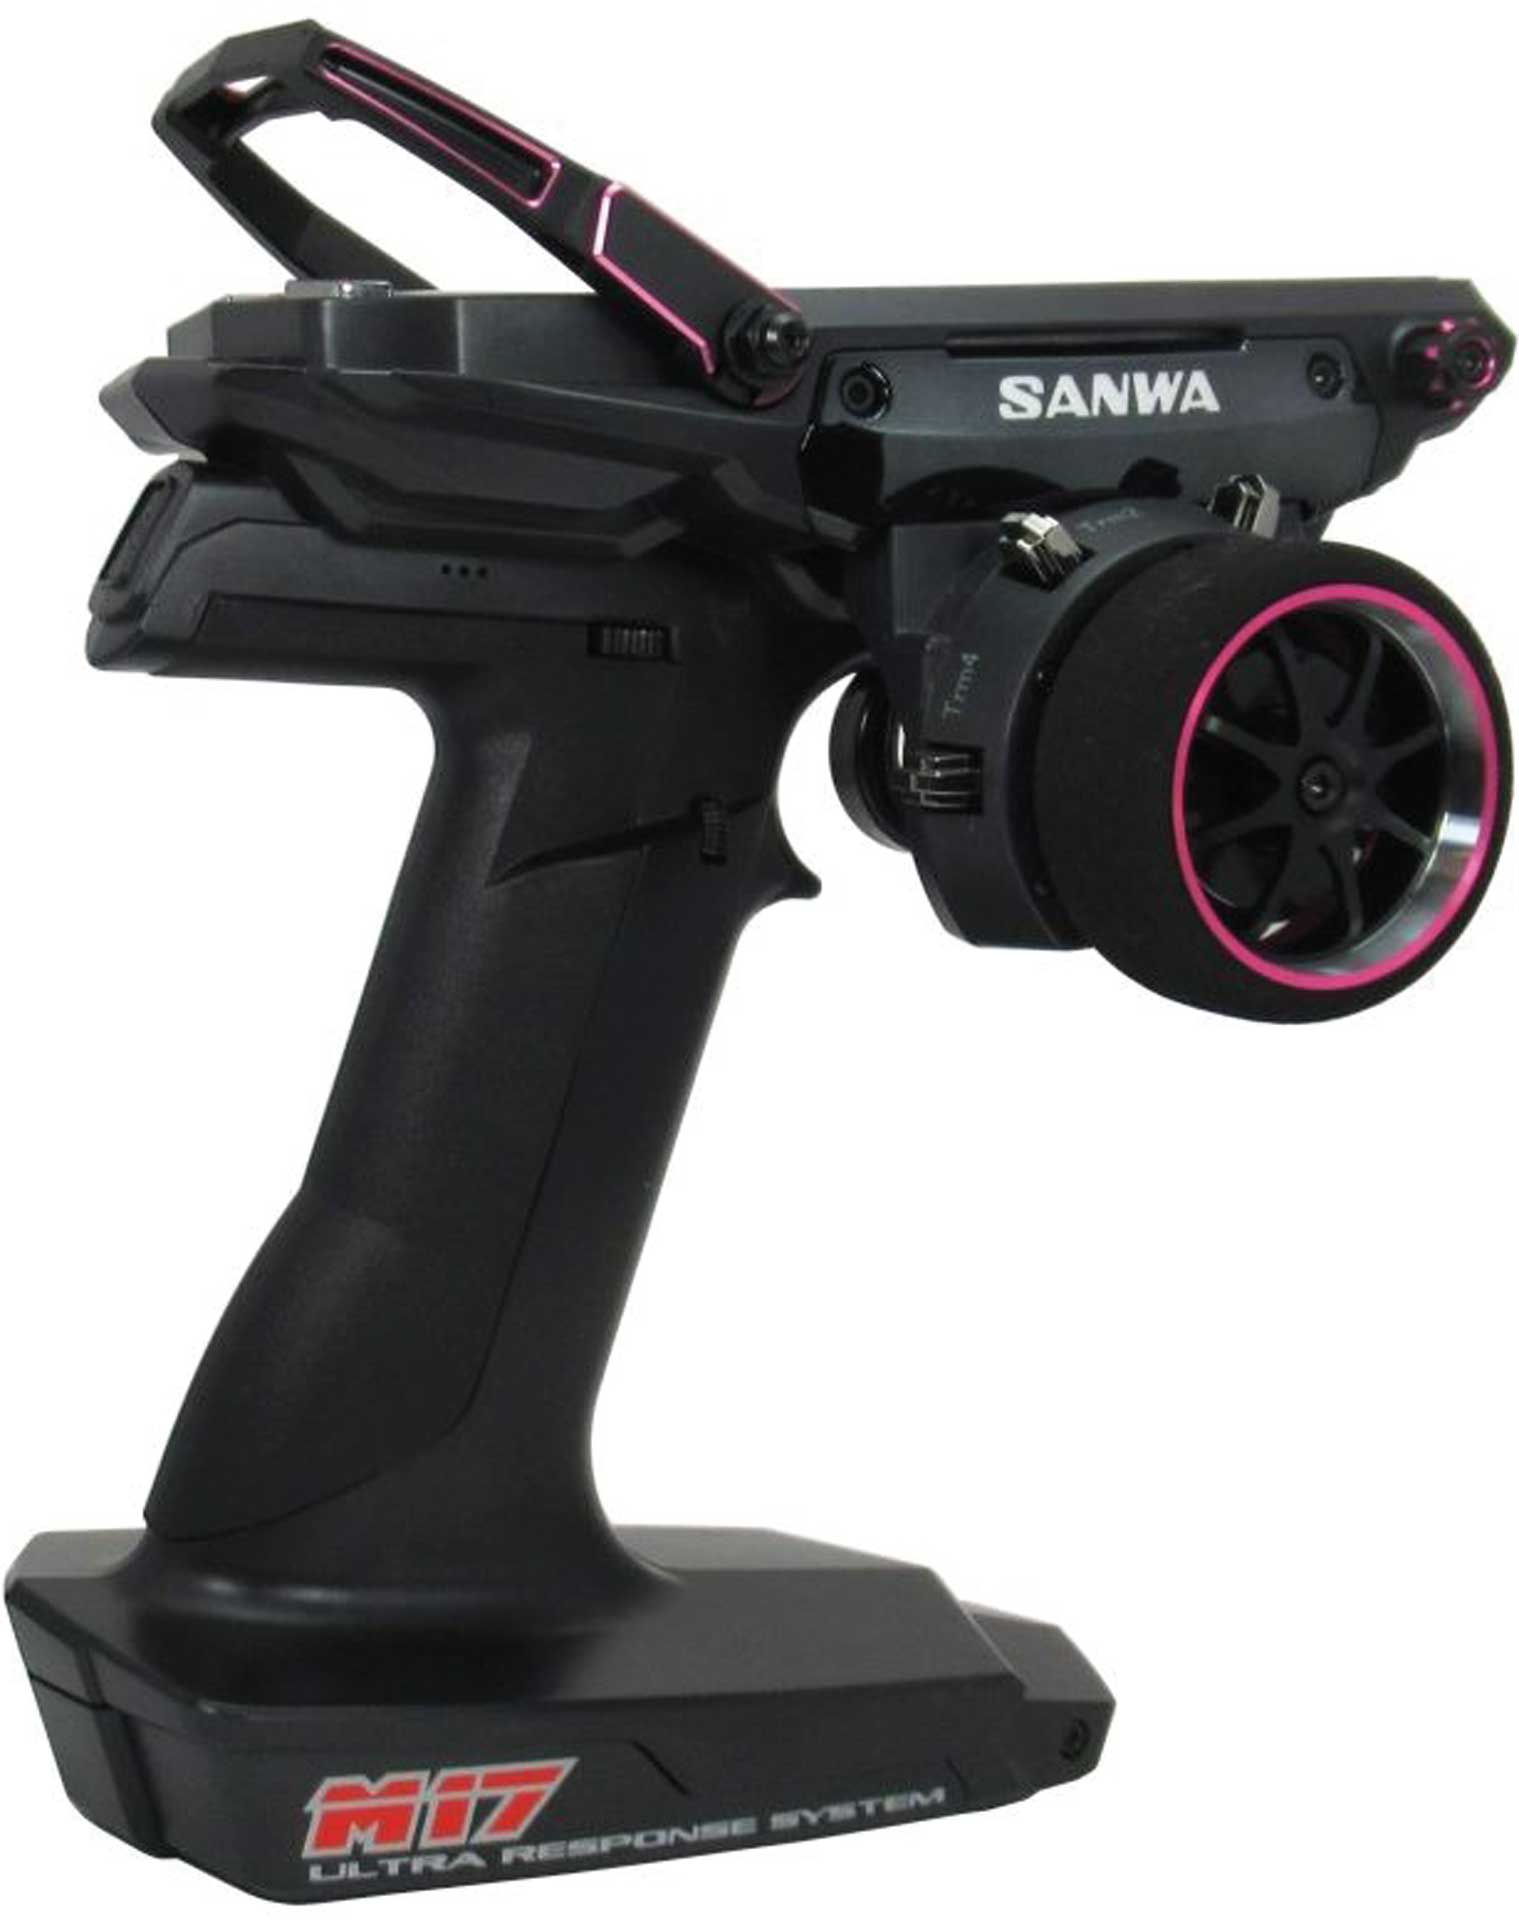 SANWA M17 - RX-493I 2.4GHZ FH5 Limited Edition Pink